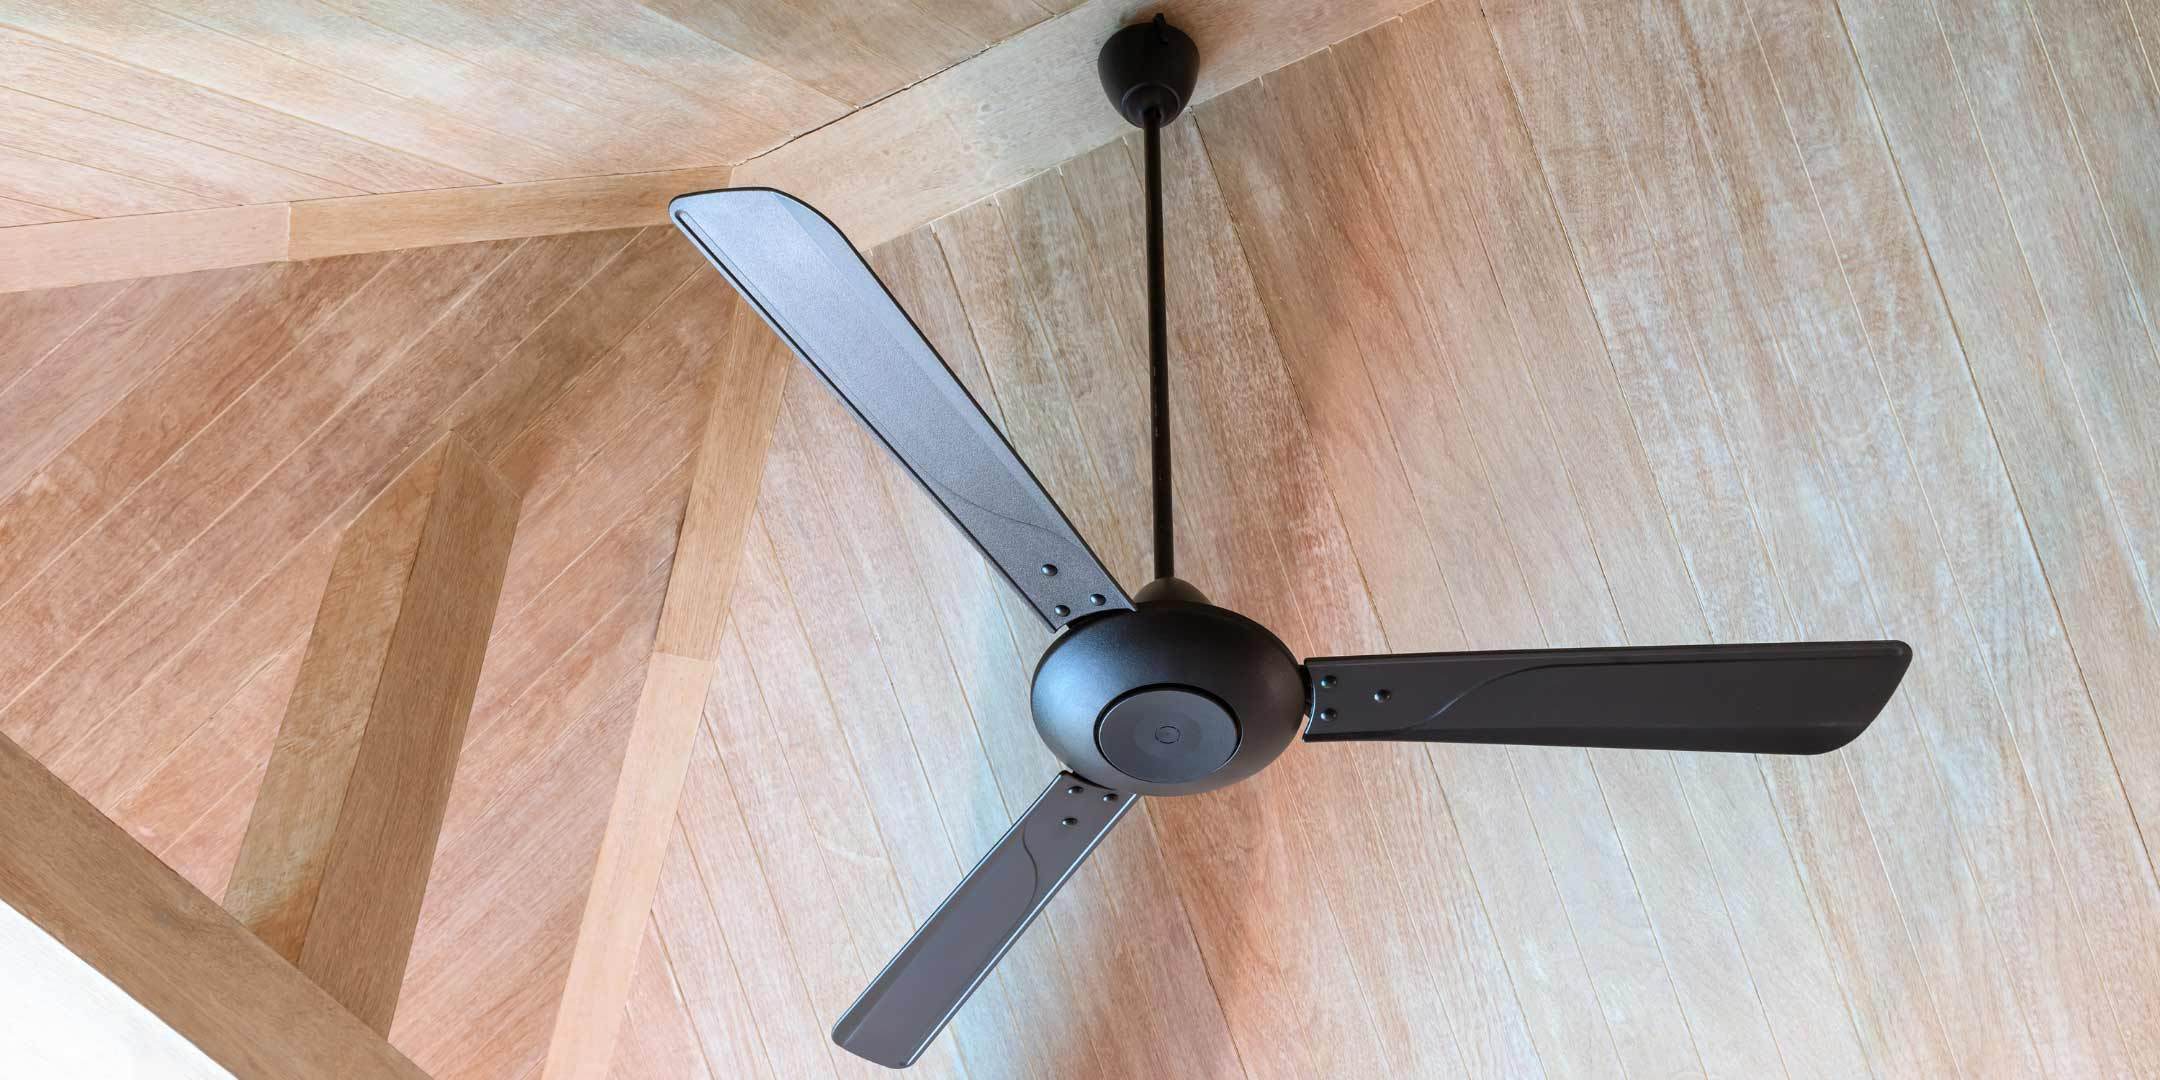 Spytte Sult arbejde Most Common Ceiling Fan Issues and How to Solve Them